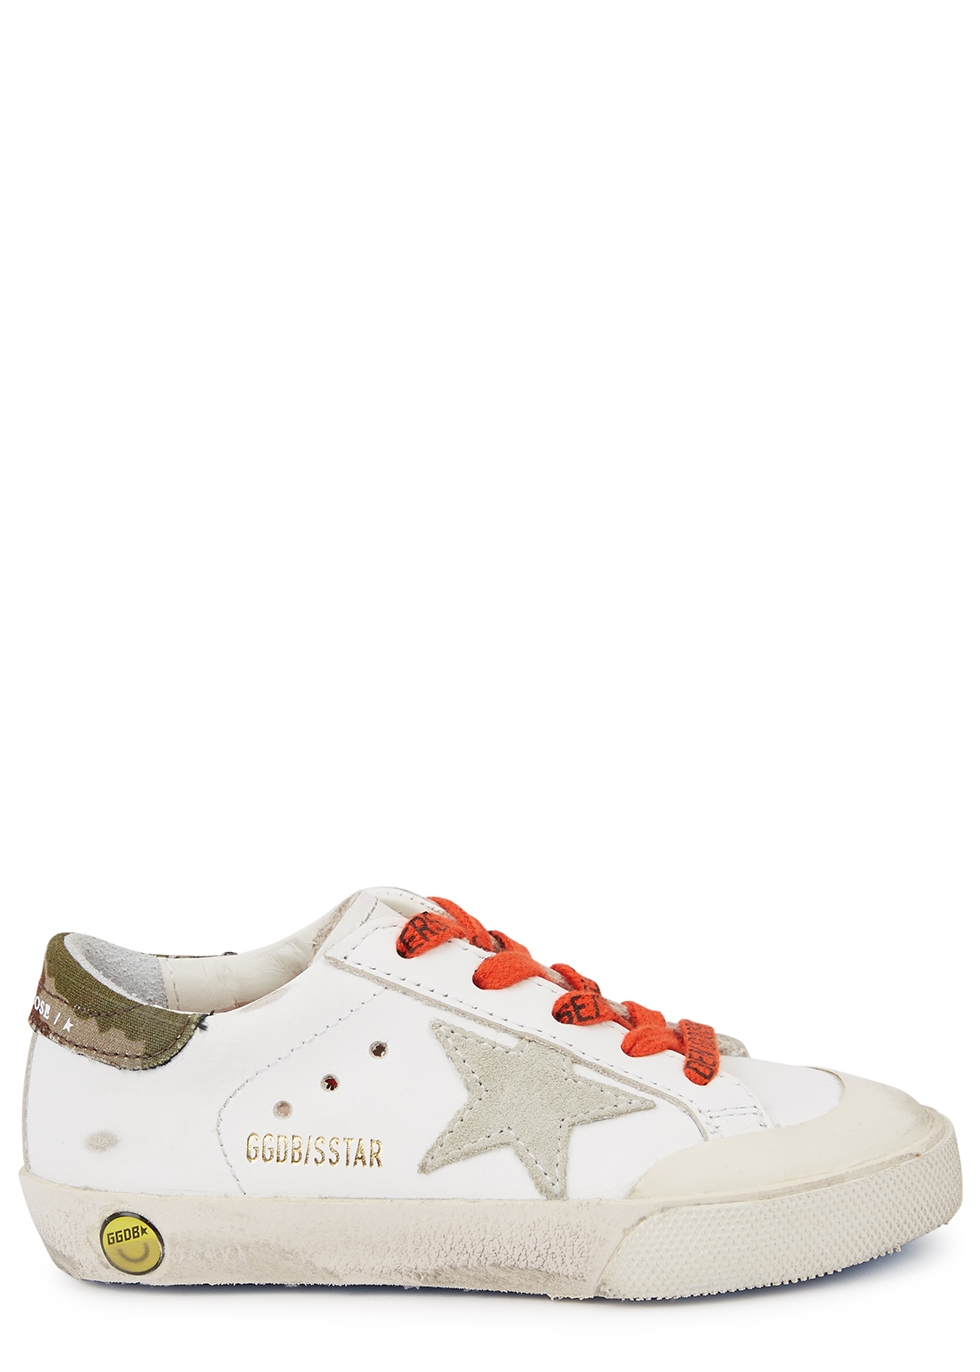 KIDS Superstar white leather sneakers (IT19-IT27)